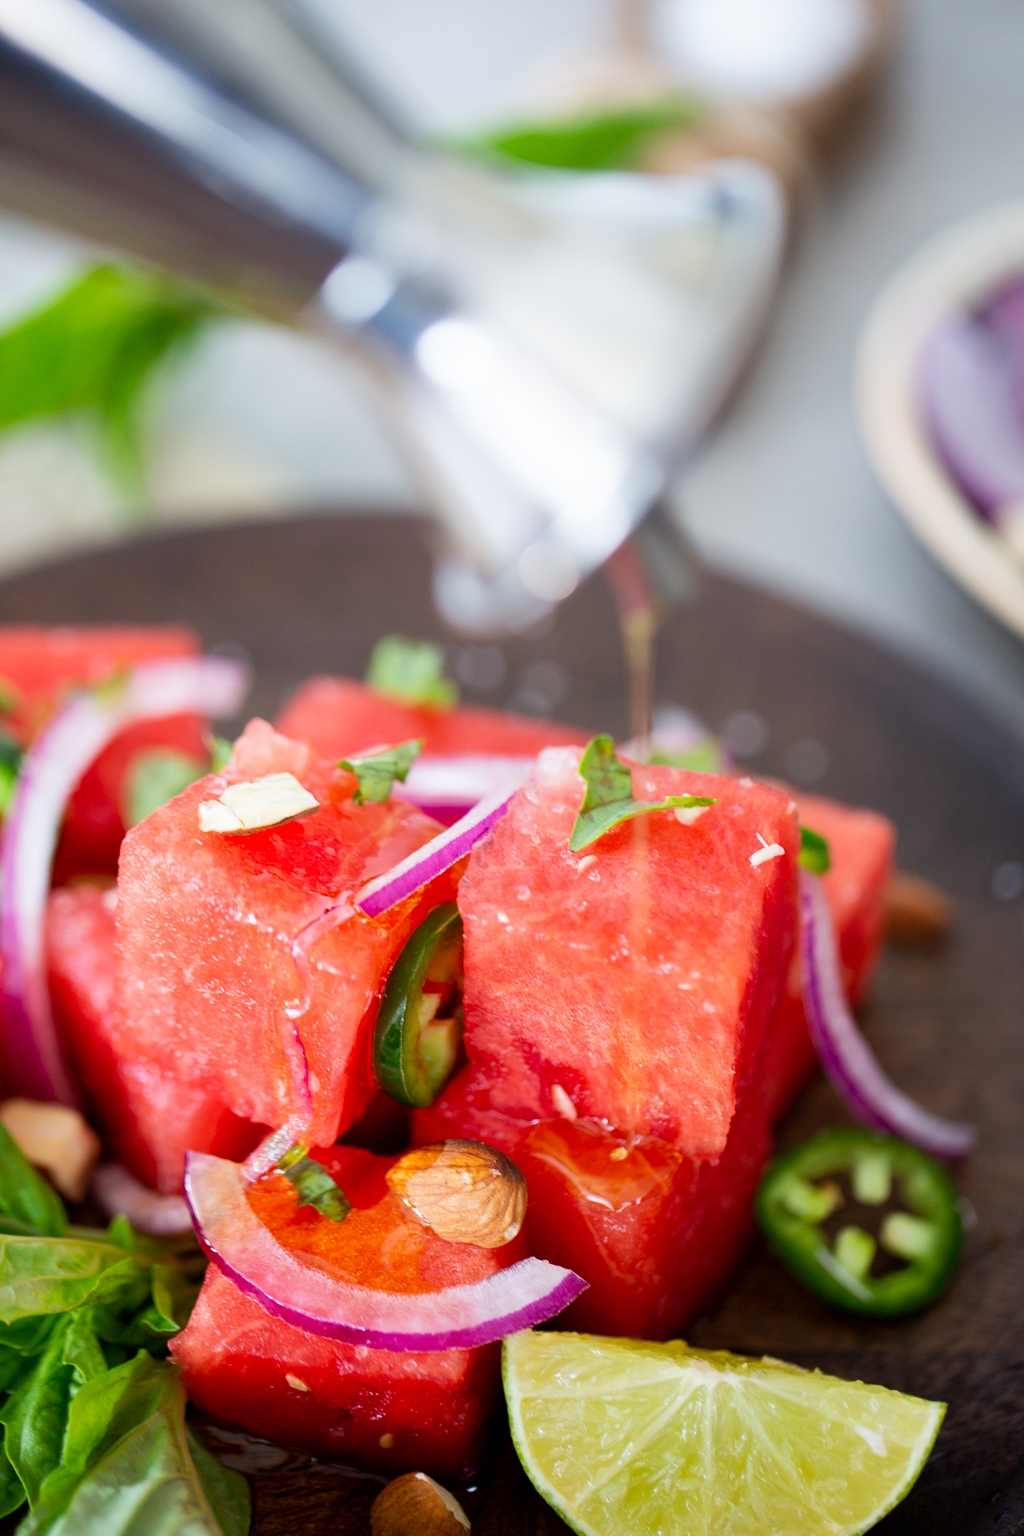 Spicy Watermelon saladbeing drizzled with olive oil .
